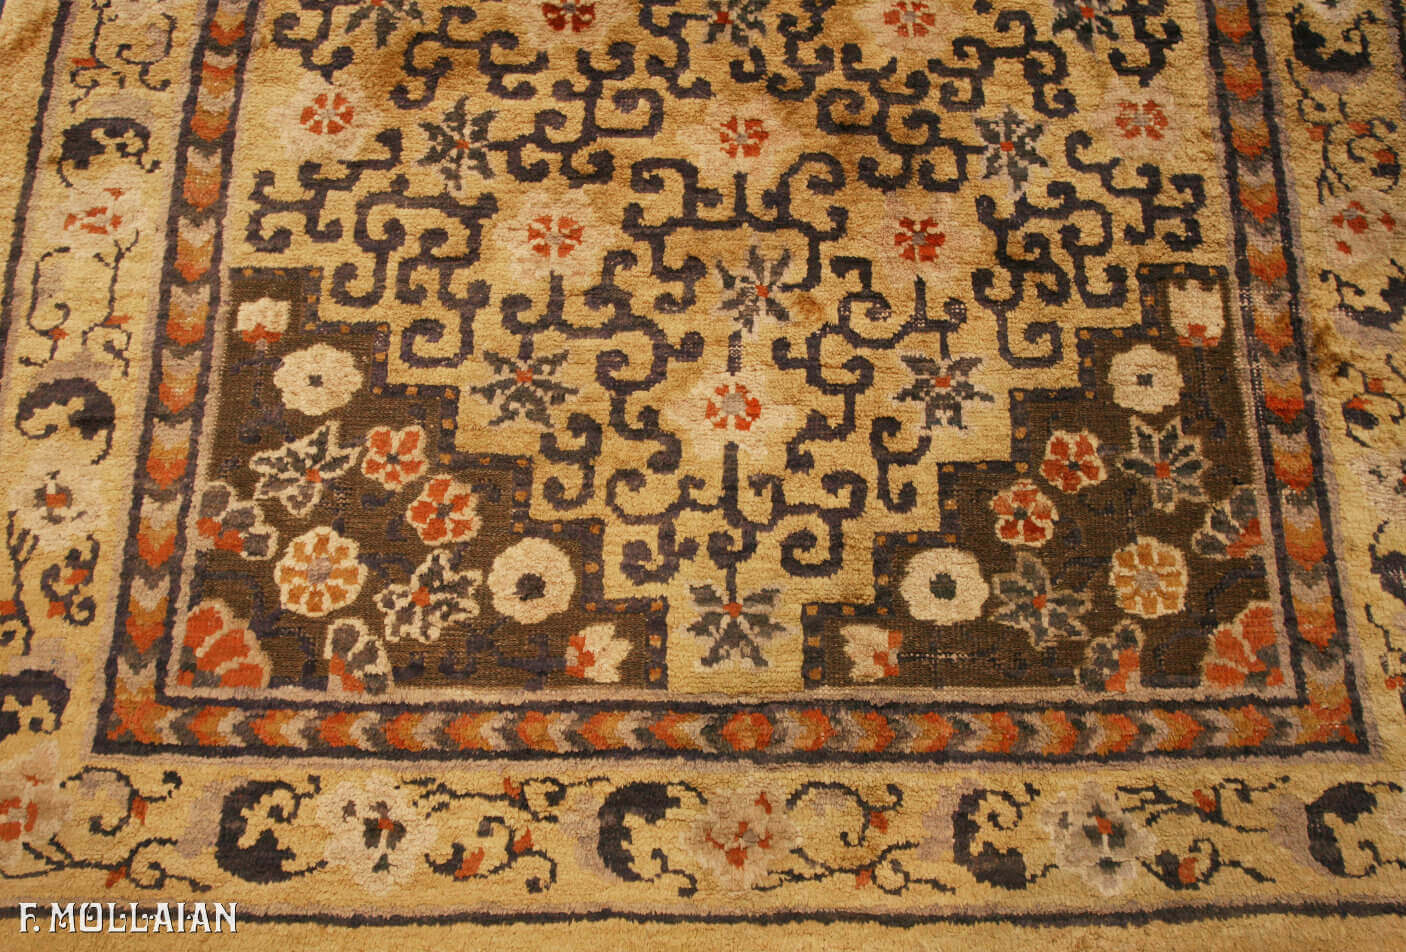 Antique Chinese Imperial Palace Ningxia Metal-Thread Souf Carpet n°:17335821